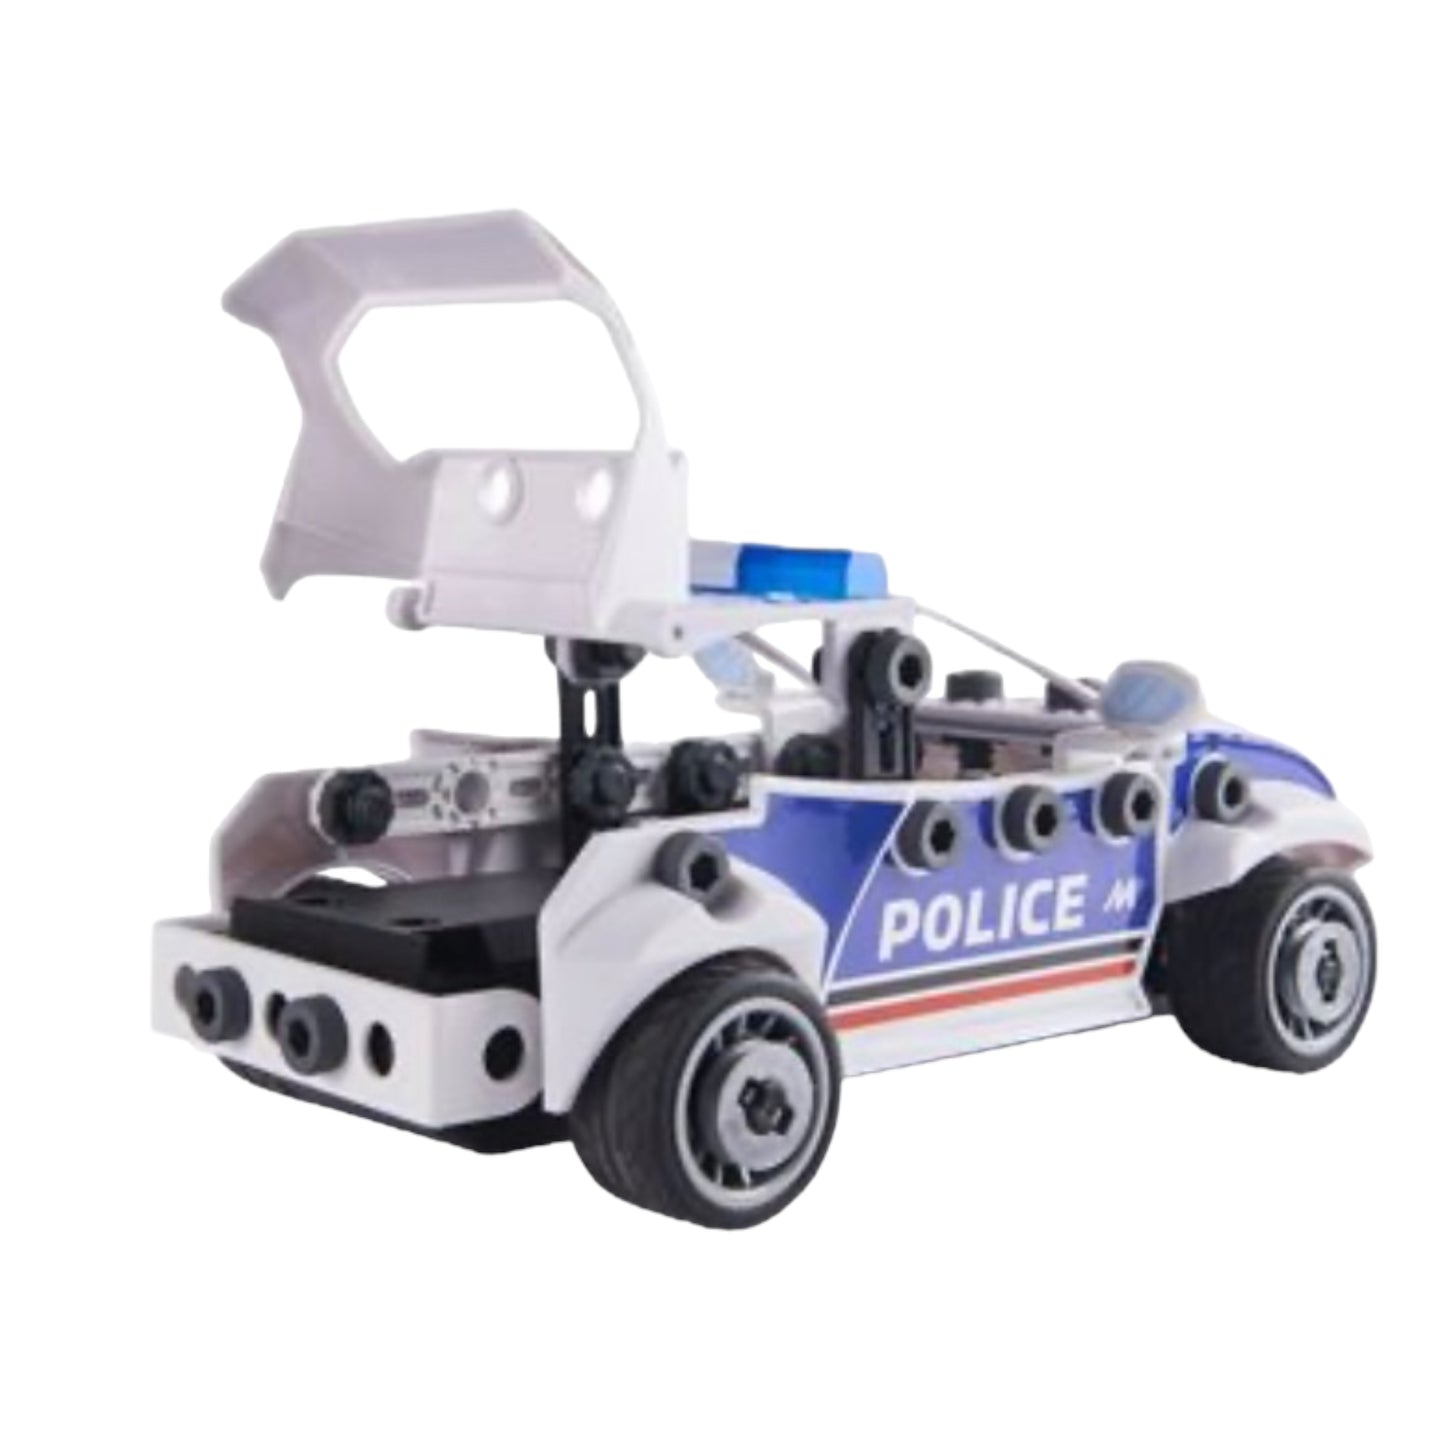 Meccano Junior, RC Police Car with Working Trunk and Real Tools, Toy Model Building Kit, STEM Toys